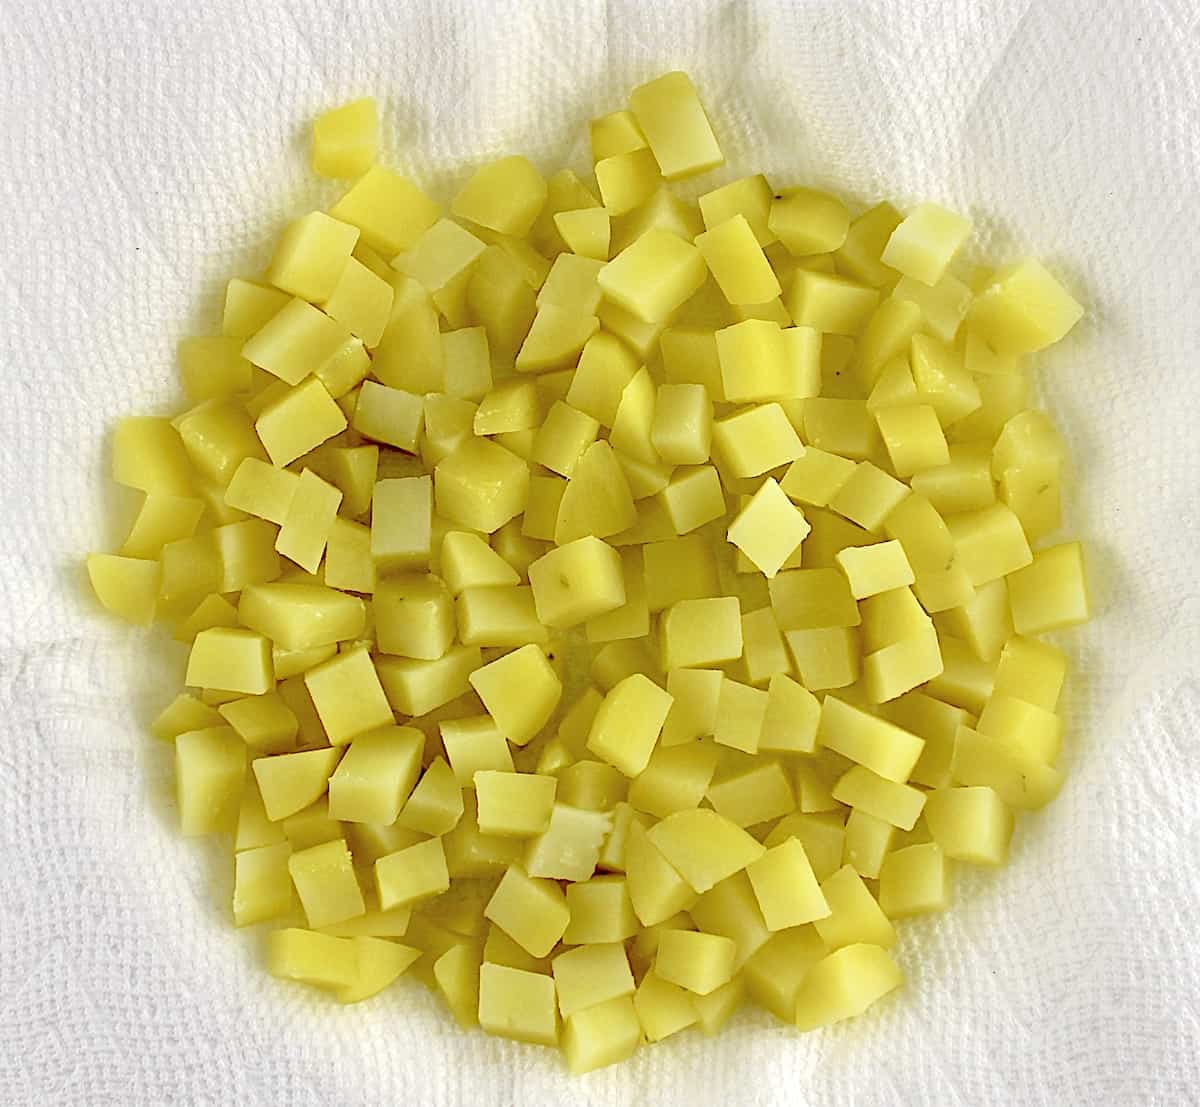 cooked diced gold potatoes on paper towels